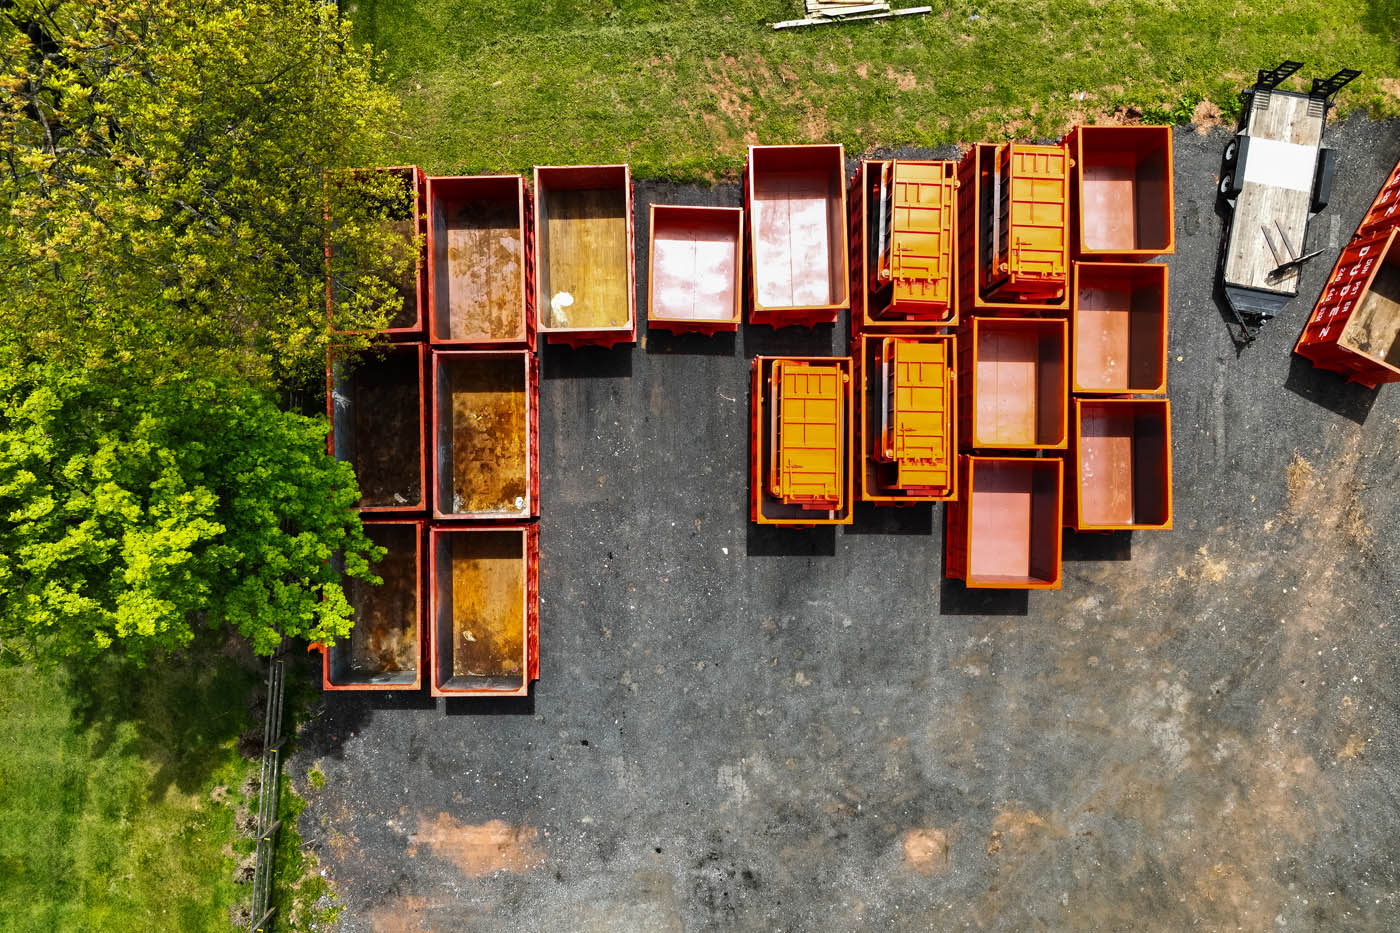 
				Sky view of a holding lot for commercial dumpsters at Dumpster Dudez.		
			